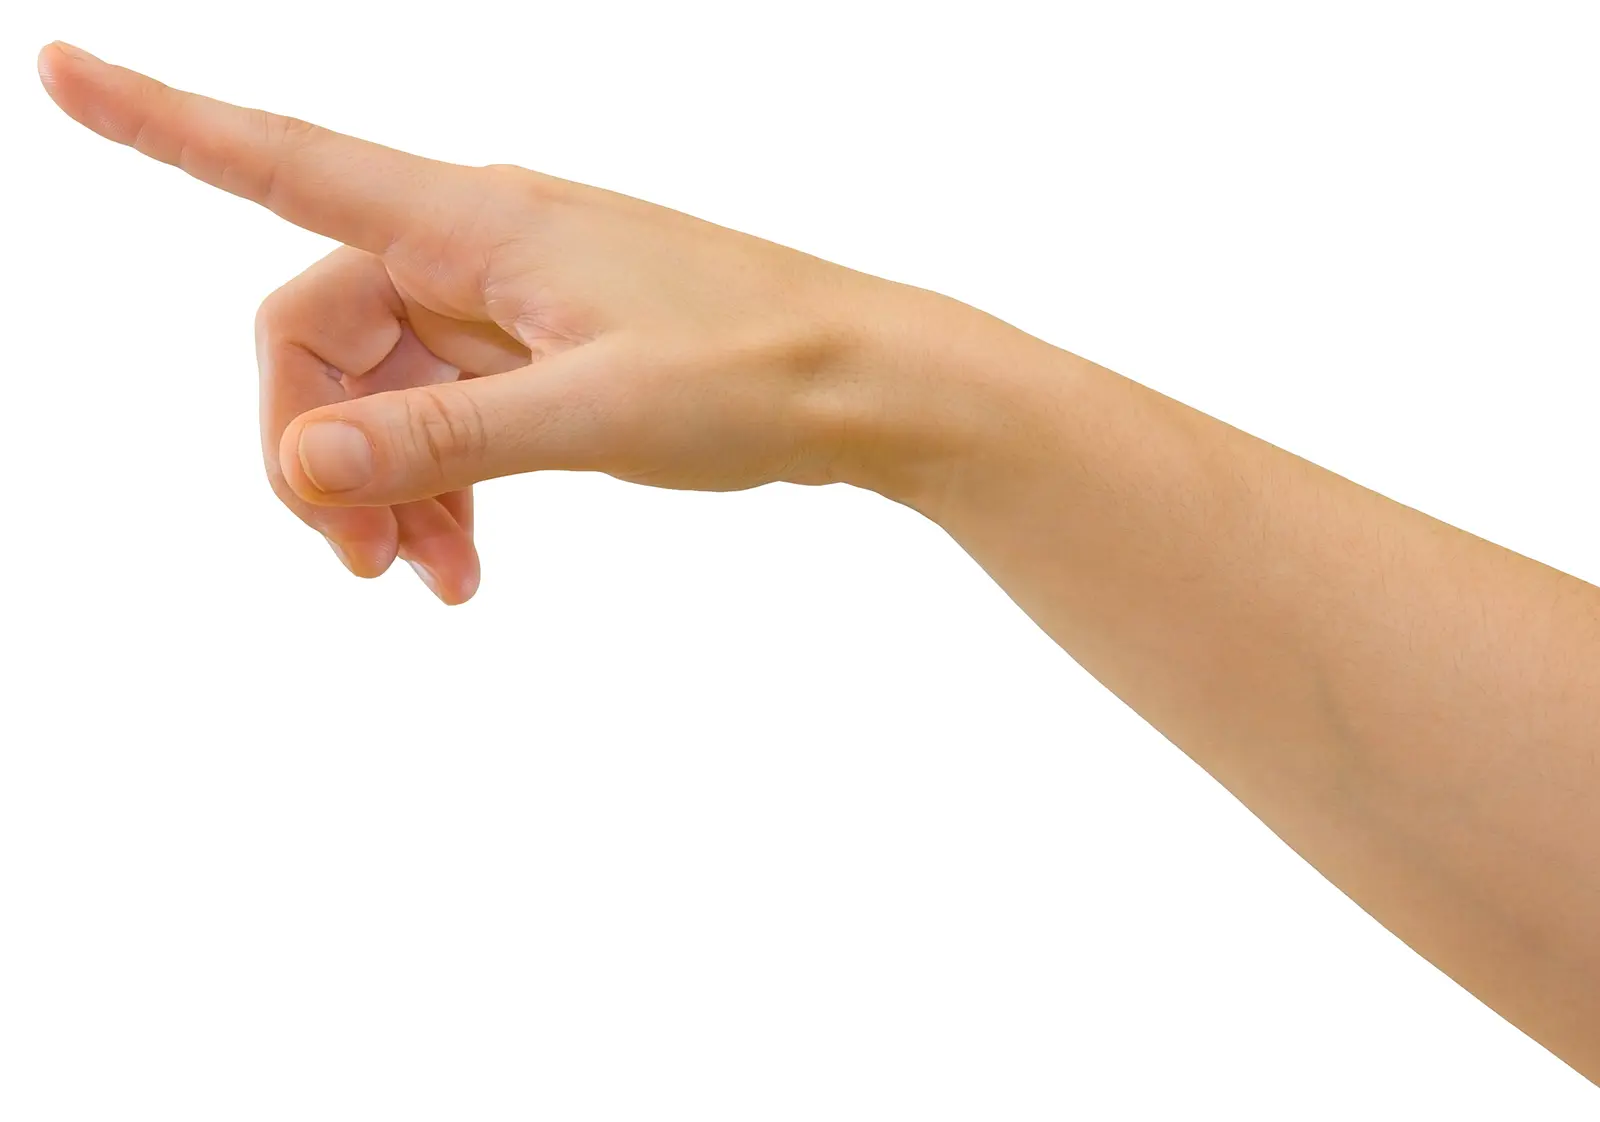 Hand with finger pointing outward